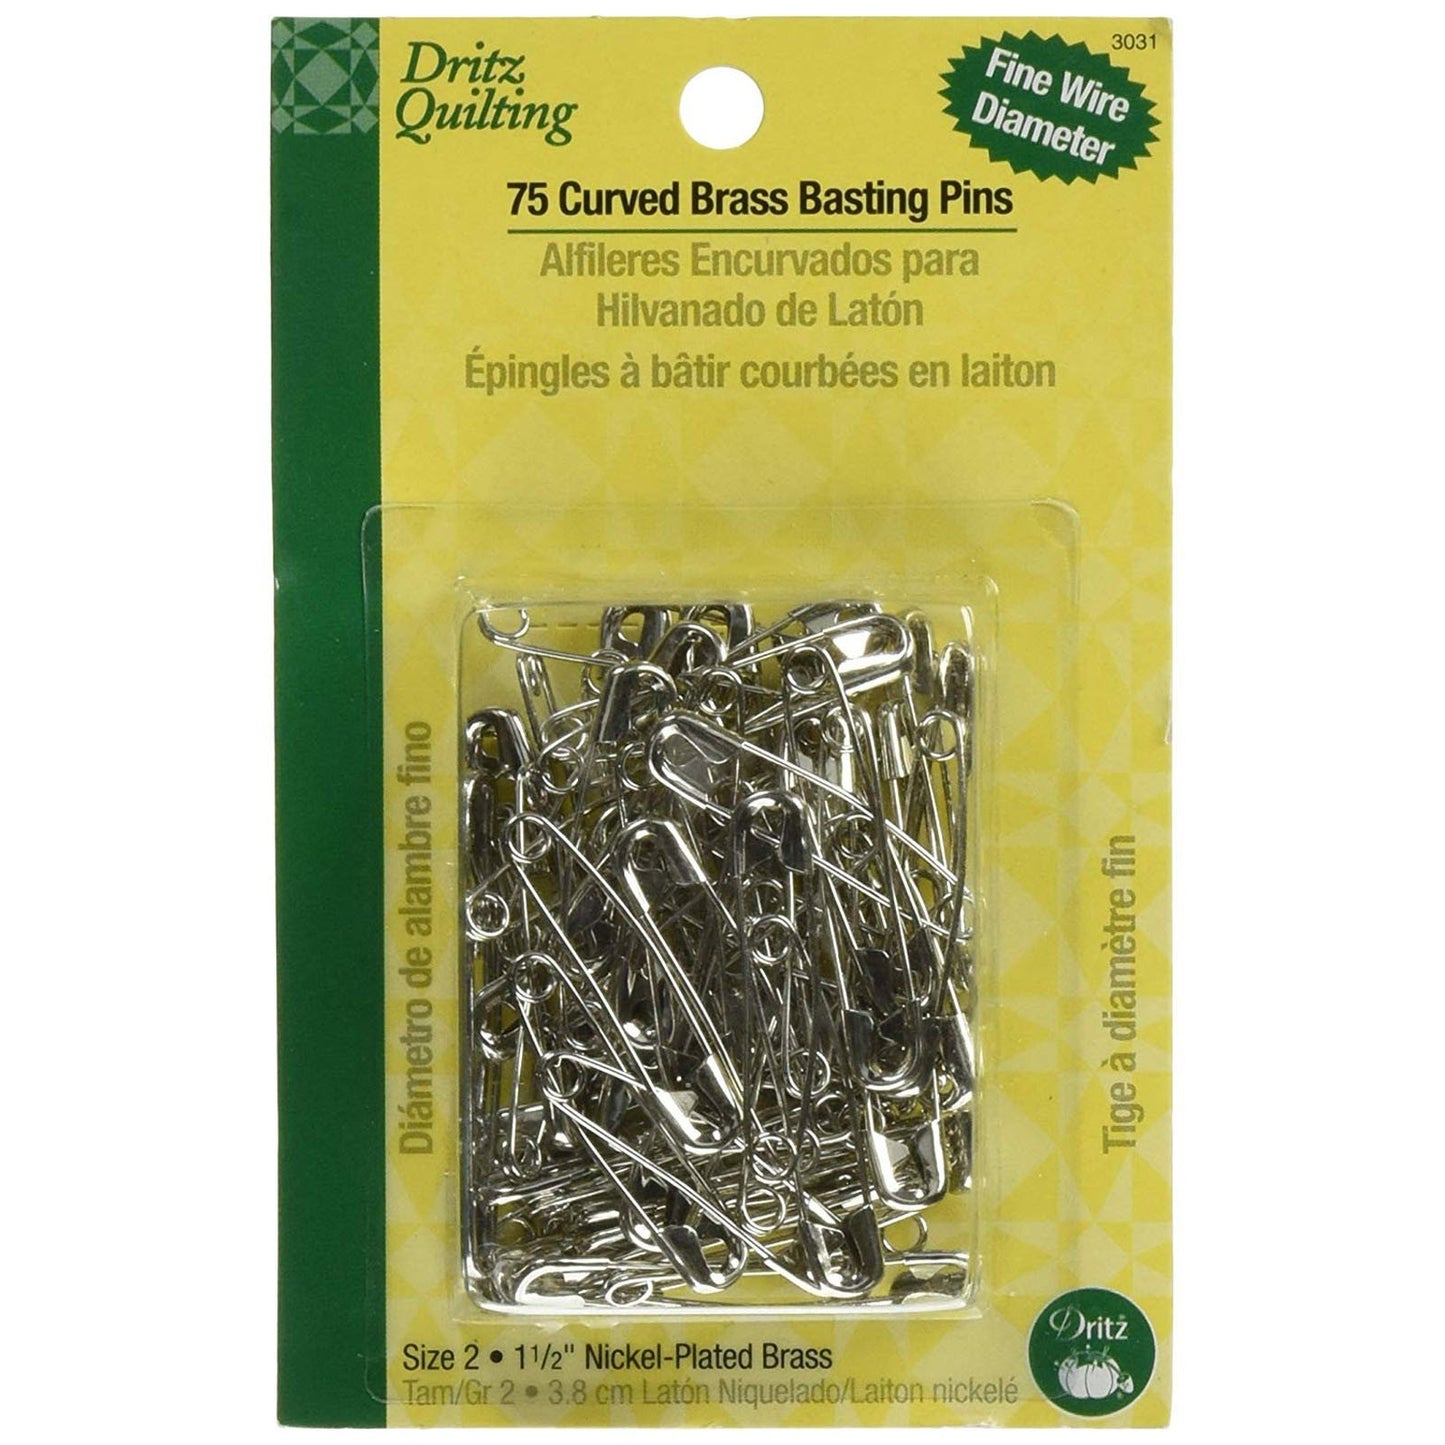 Dritz Curved Basting Pins 75pc